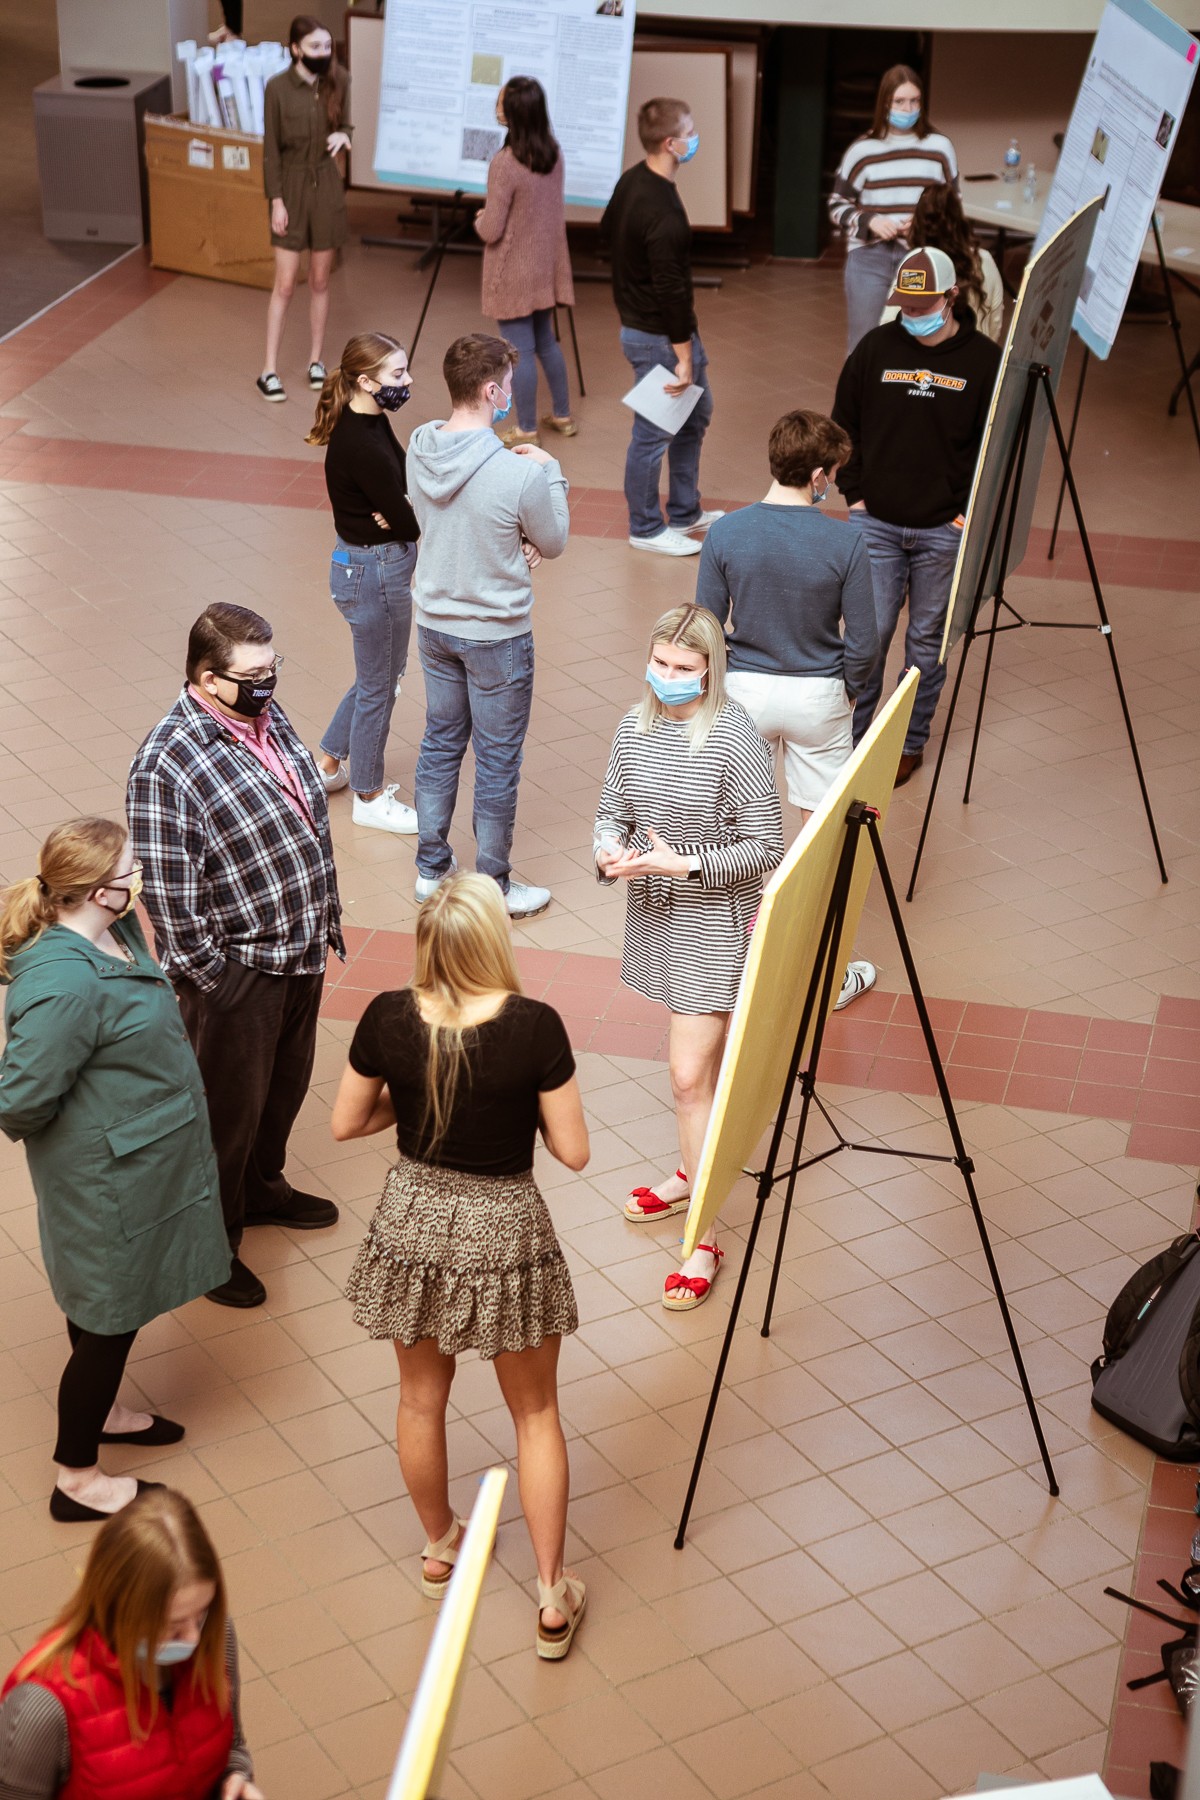 Doane's Freshman Research Symposium has been held for at least seven years.